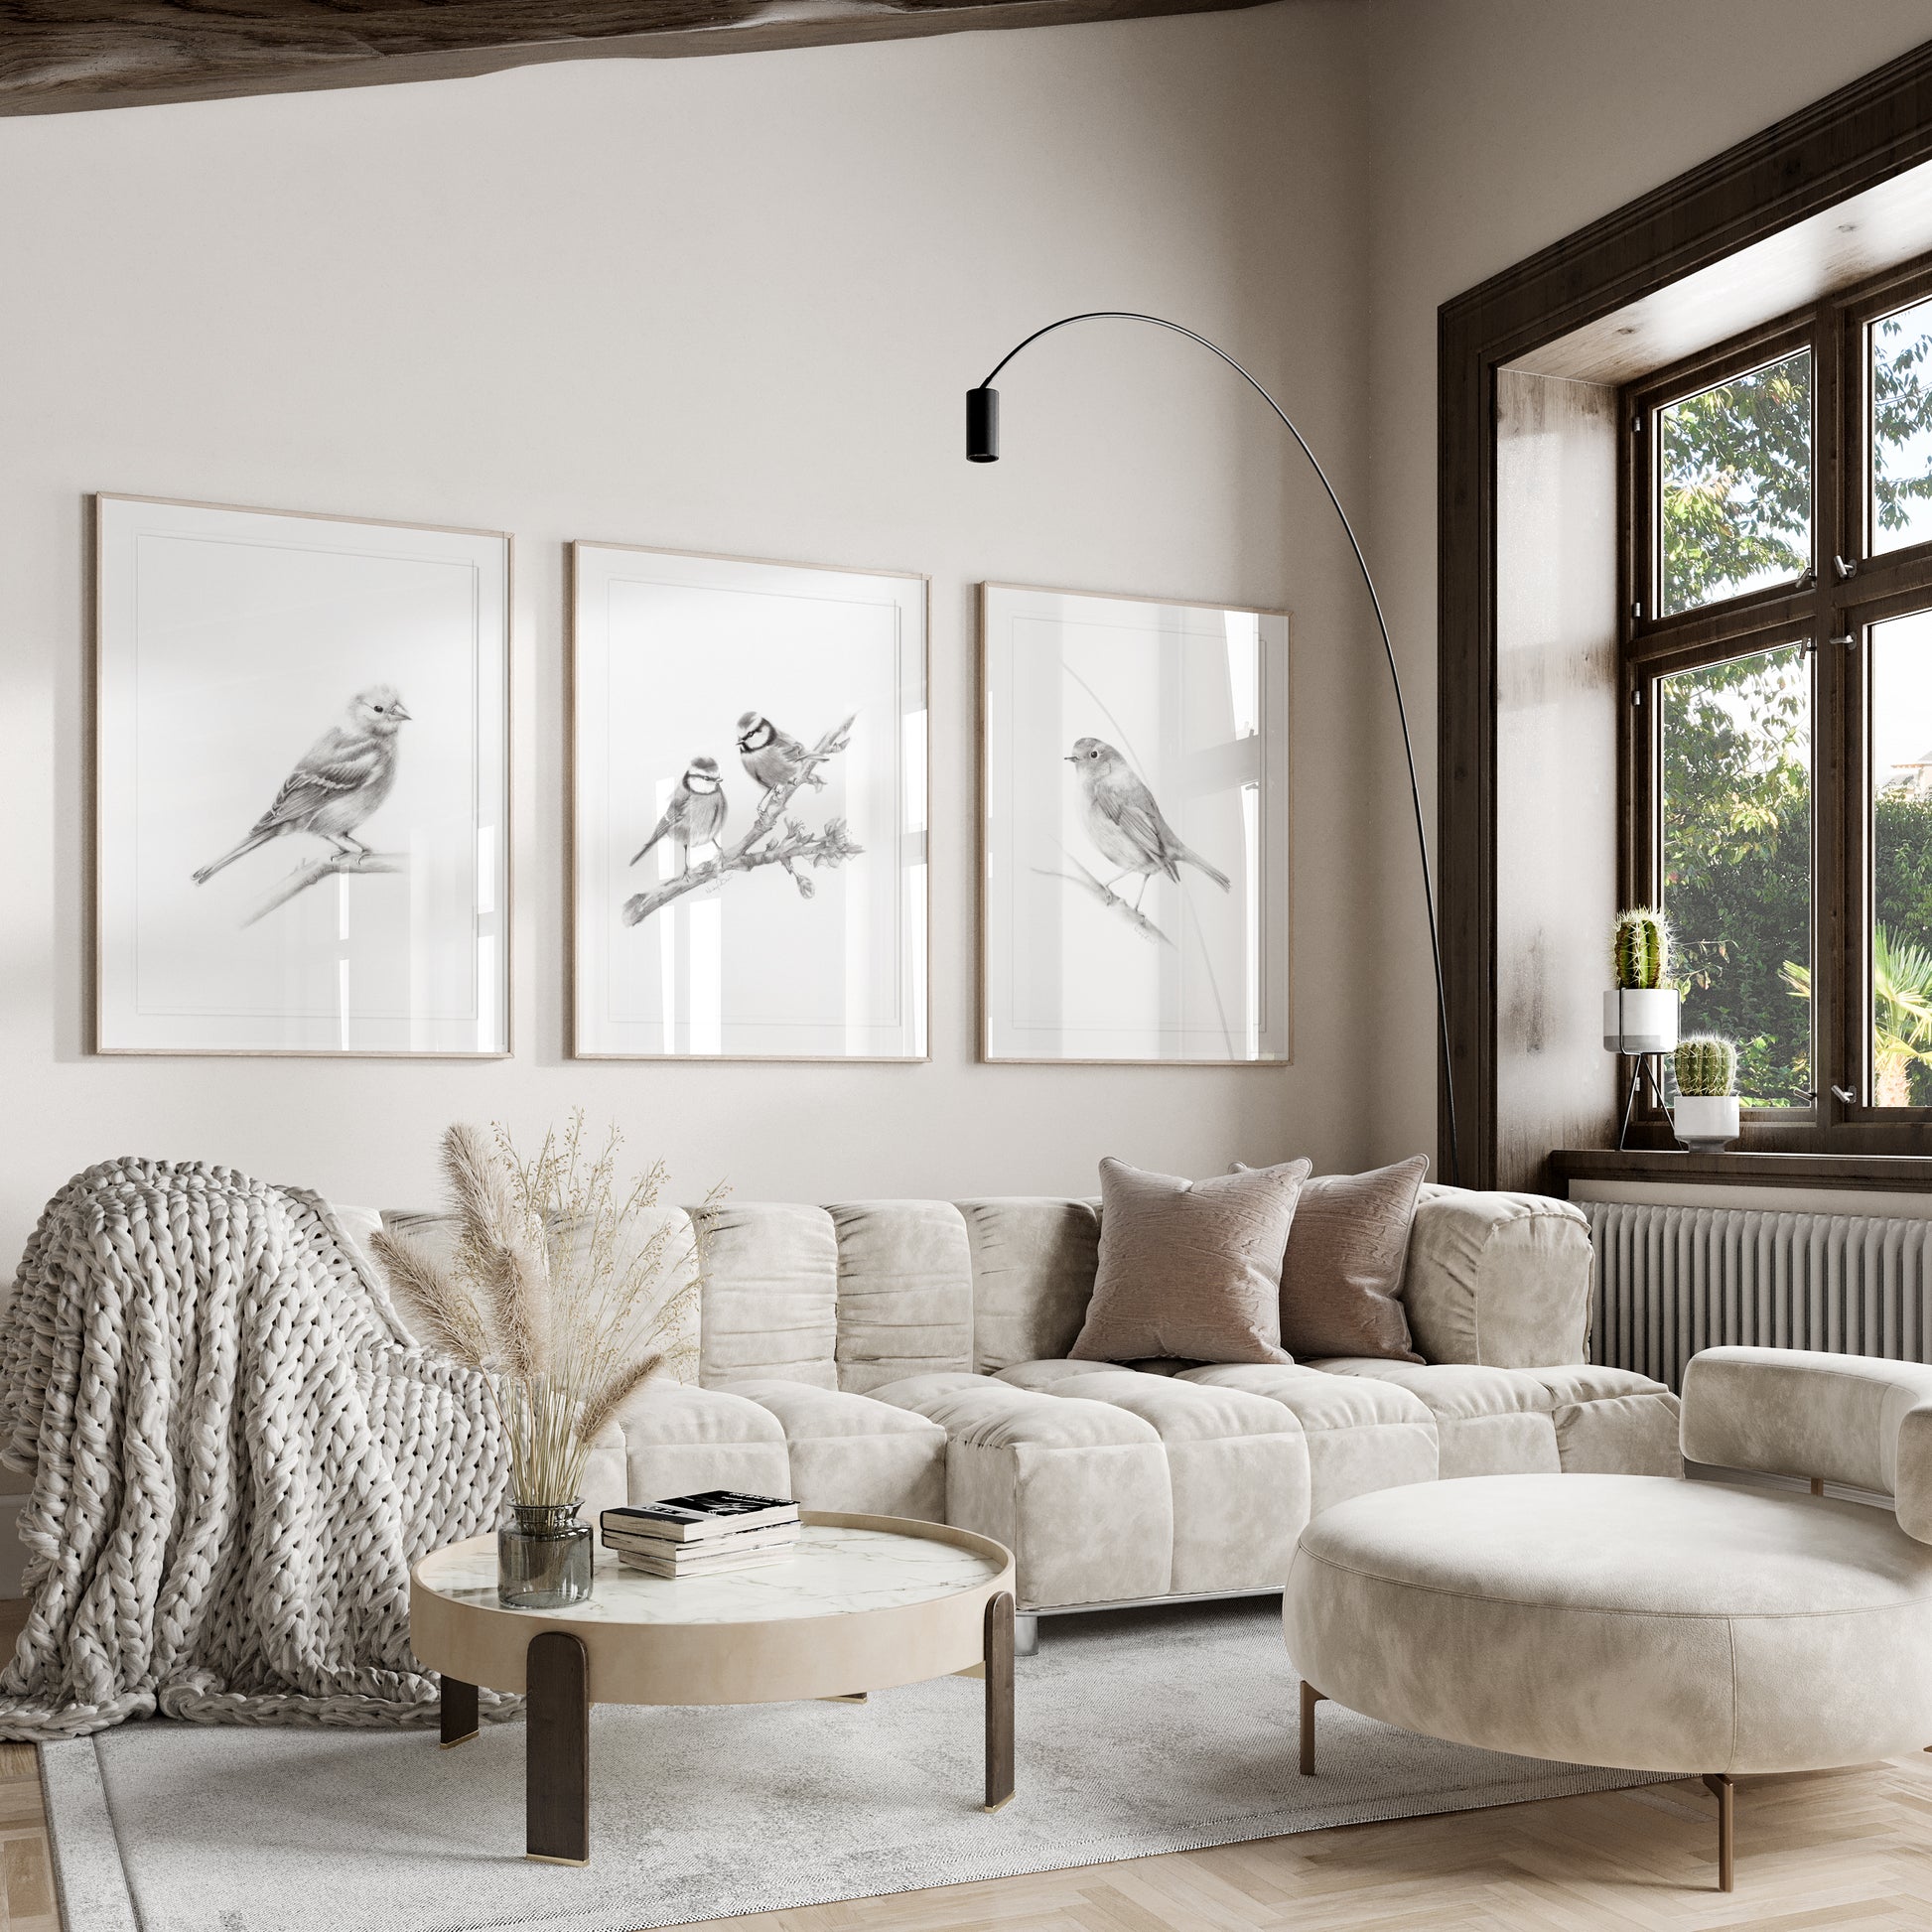 Set of 3 grey bird drawing art prints shown in frames hanging on a wall above a sofa. The British birds include a Robin Redbreast, Chaffinch and a pair of Blue Tit birds sitting on a branch. Art by Nicky Quartermaine Scott for Studio Q.